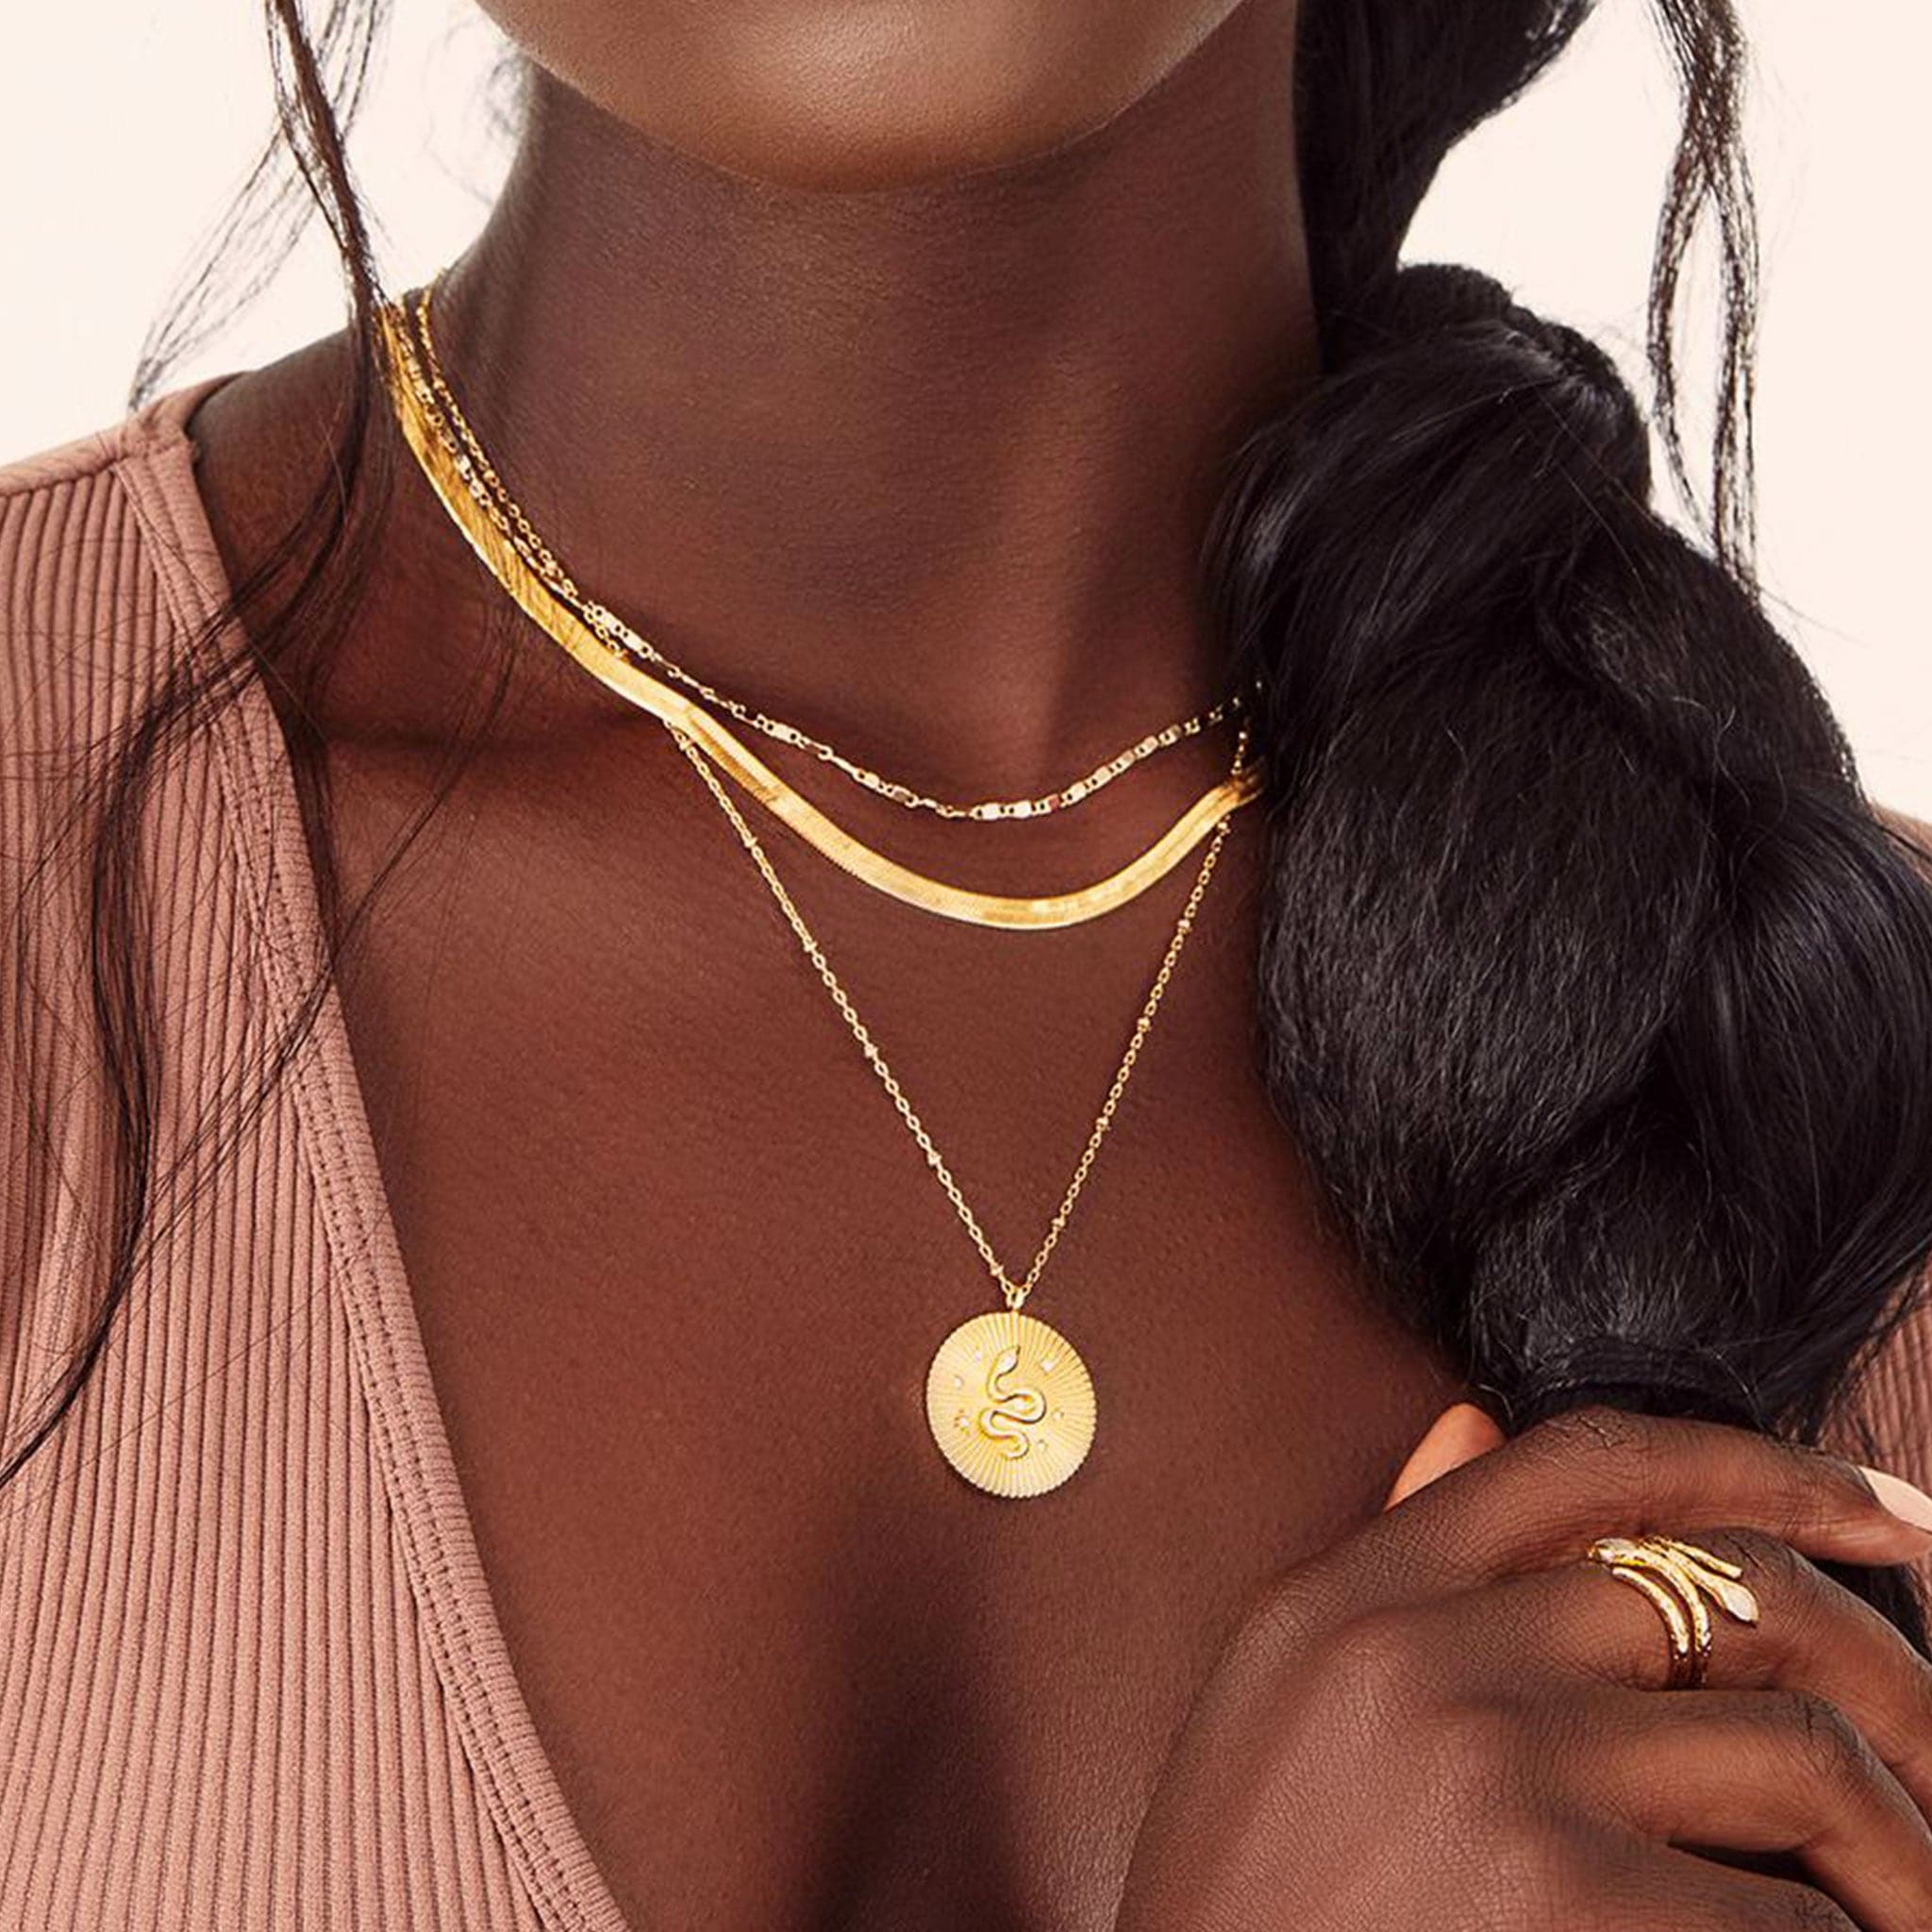 On a white background is a gold necklace with a round pendant in the center that has a snake detail with CZ stones placed around it worn on a model with other necklaces. 